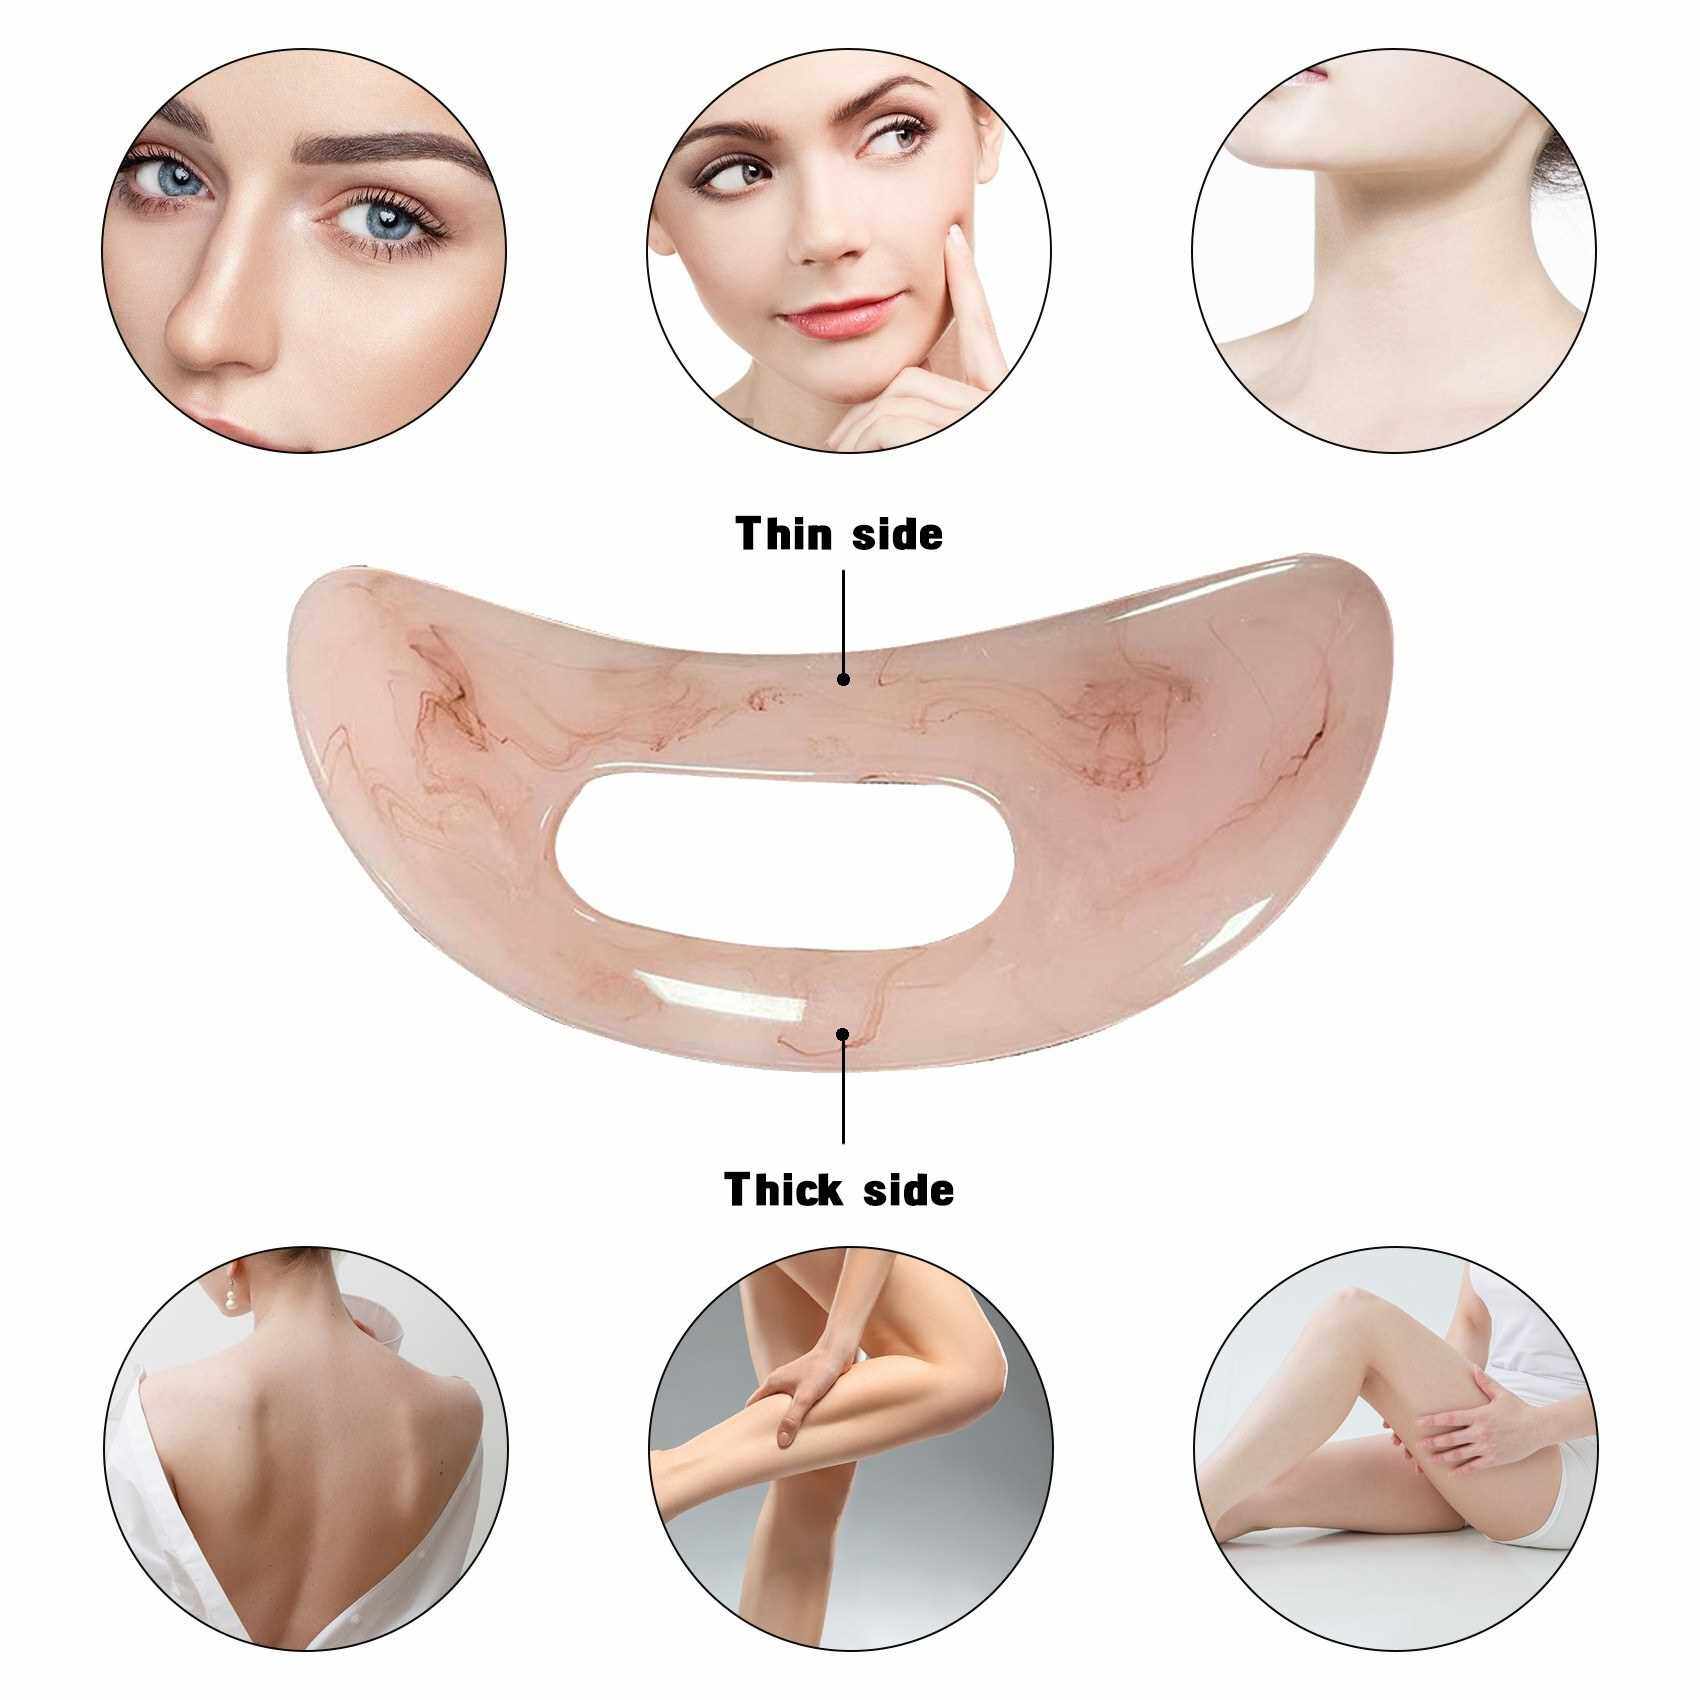 BEST SELLER Gua Sha Facial-Tool Face Massage Scraper Ice Massager for SPA Acupuncture Therapy Trigger Point Face Eye Puffiness Body Relaxing Neck Skin Rejuvenation (Beige)